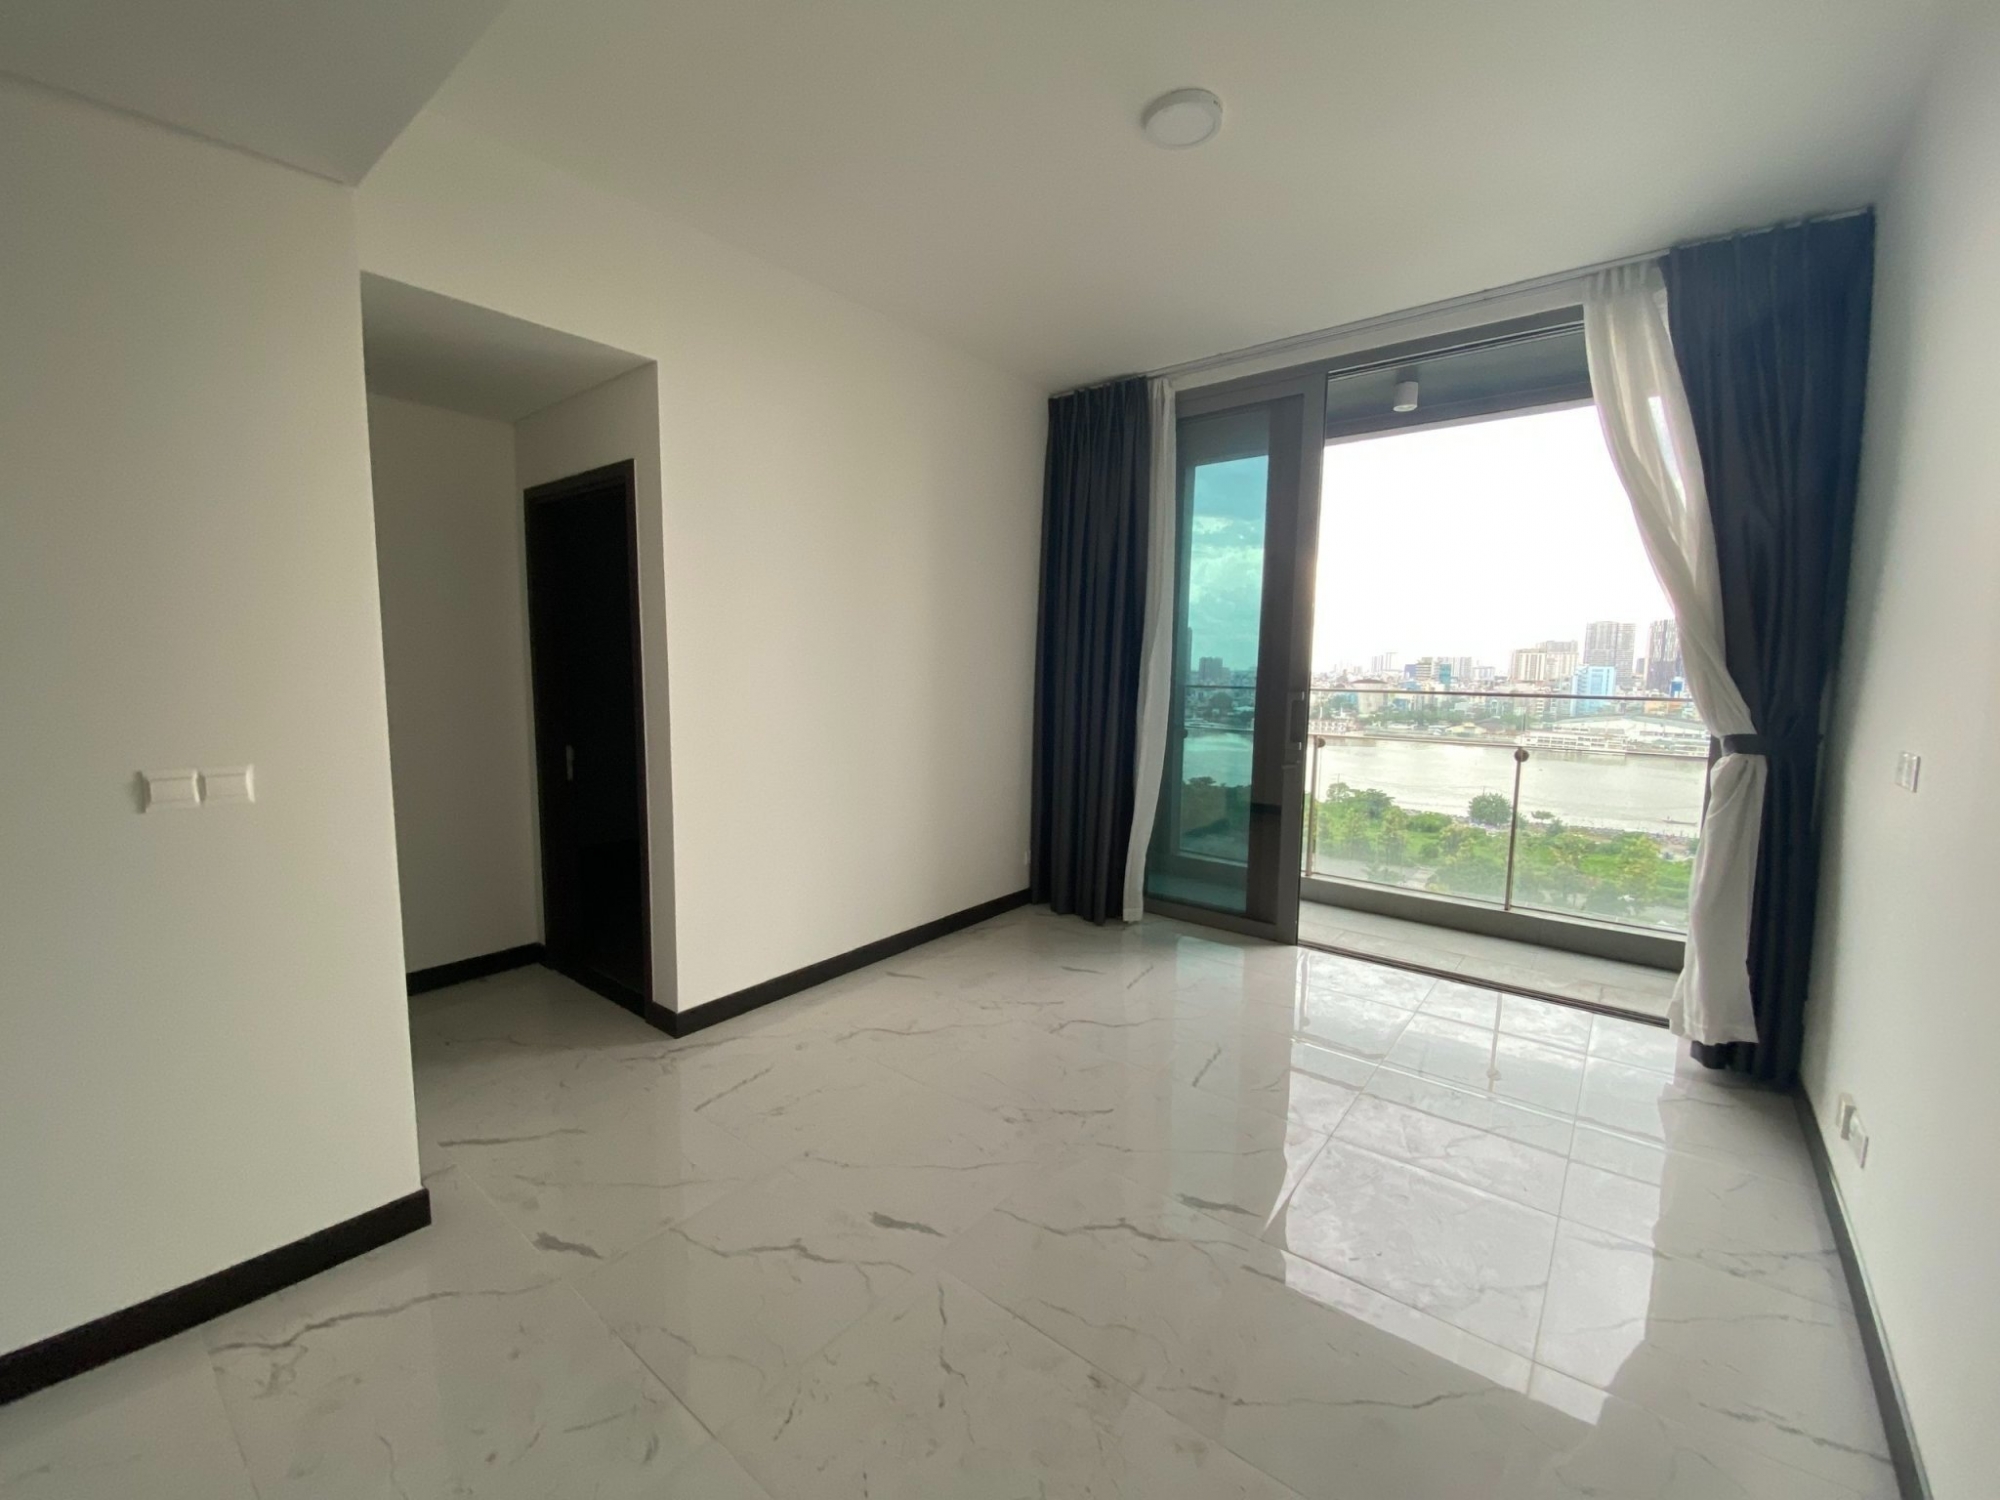 Open view 1 bedroom apartment for rent in Empire City with basic furniture